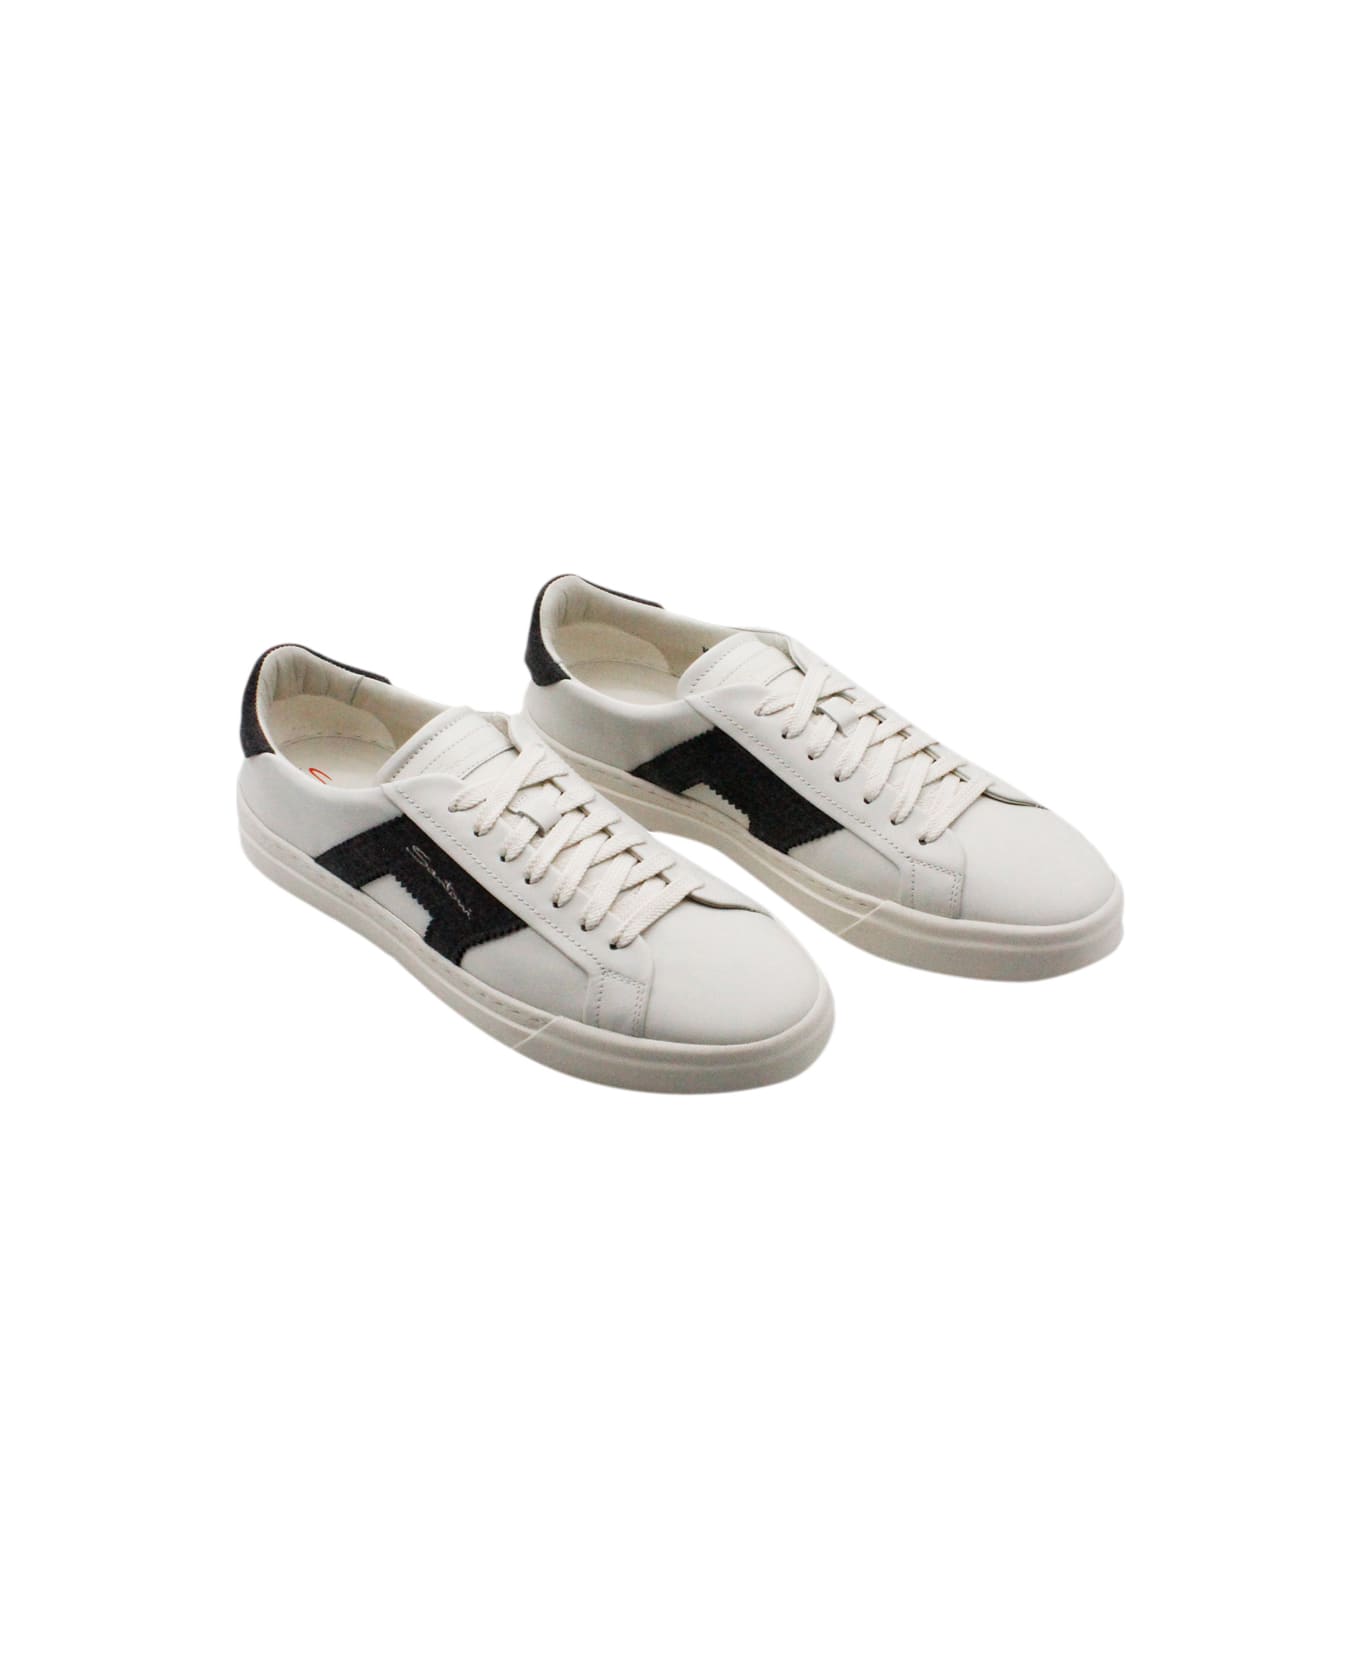 Santoni Sneaker In Soft Calfskin With Side And Back Inserts In Contrasting Color With Logo Lettering. Closing Laces - White スニーカー